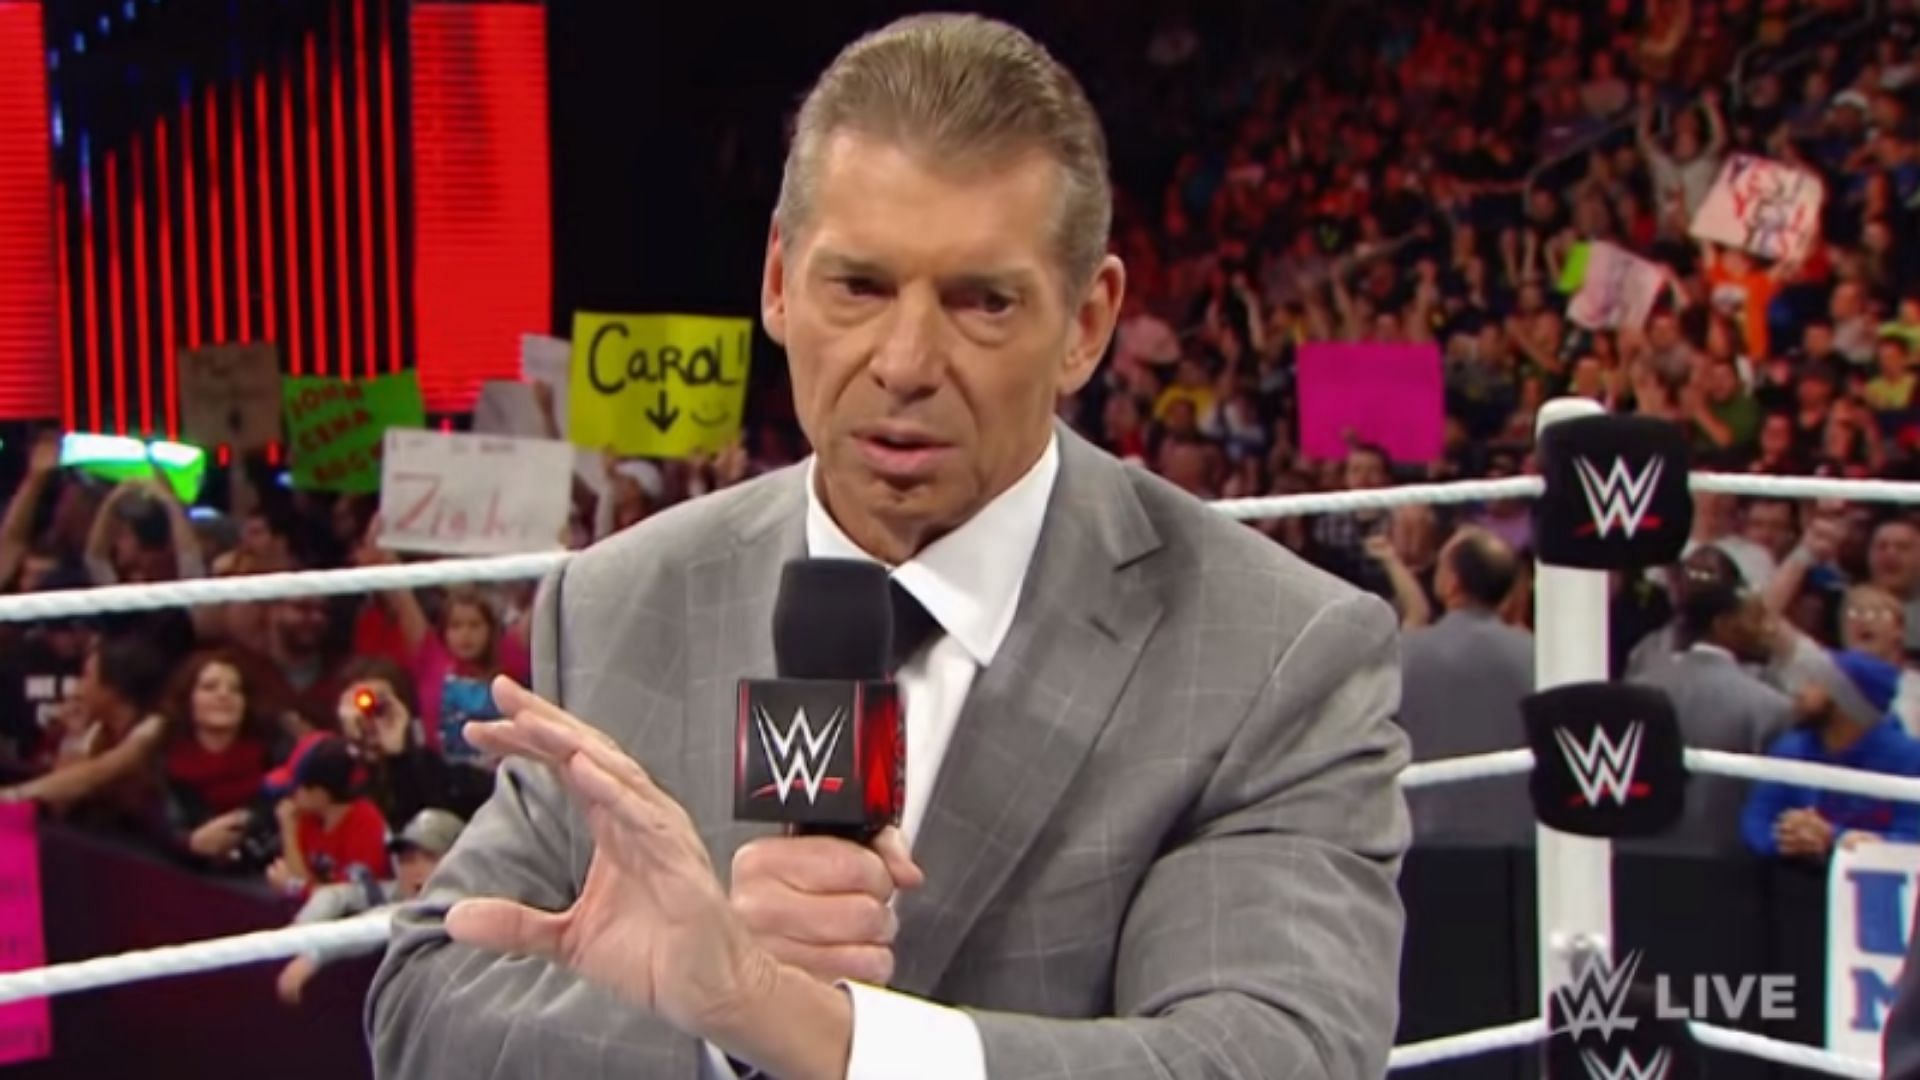 The WWE Chairman is known to hate when people sneeze around him